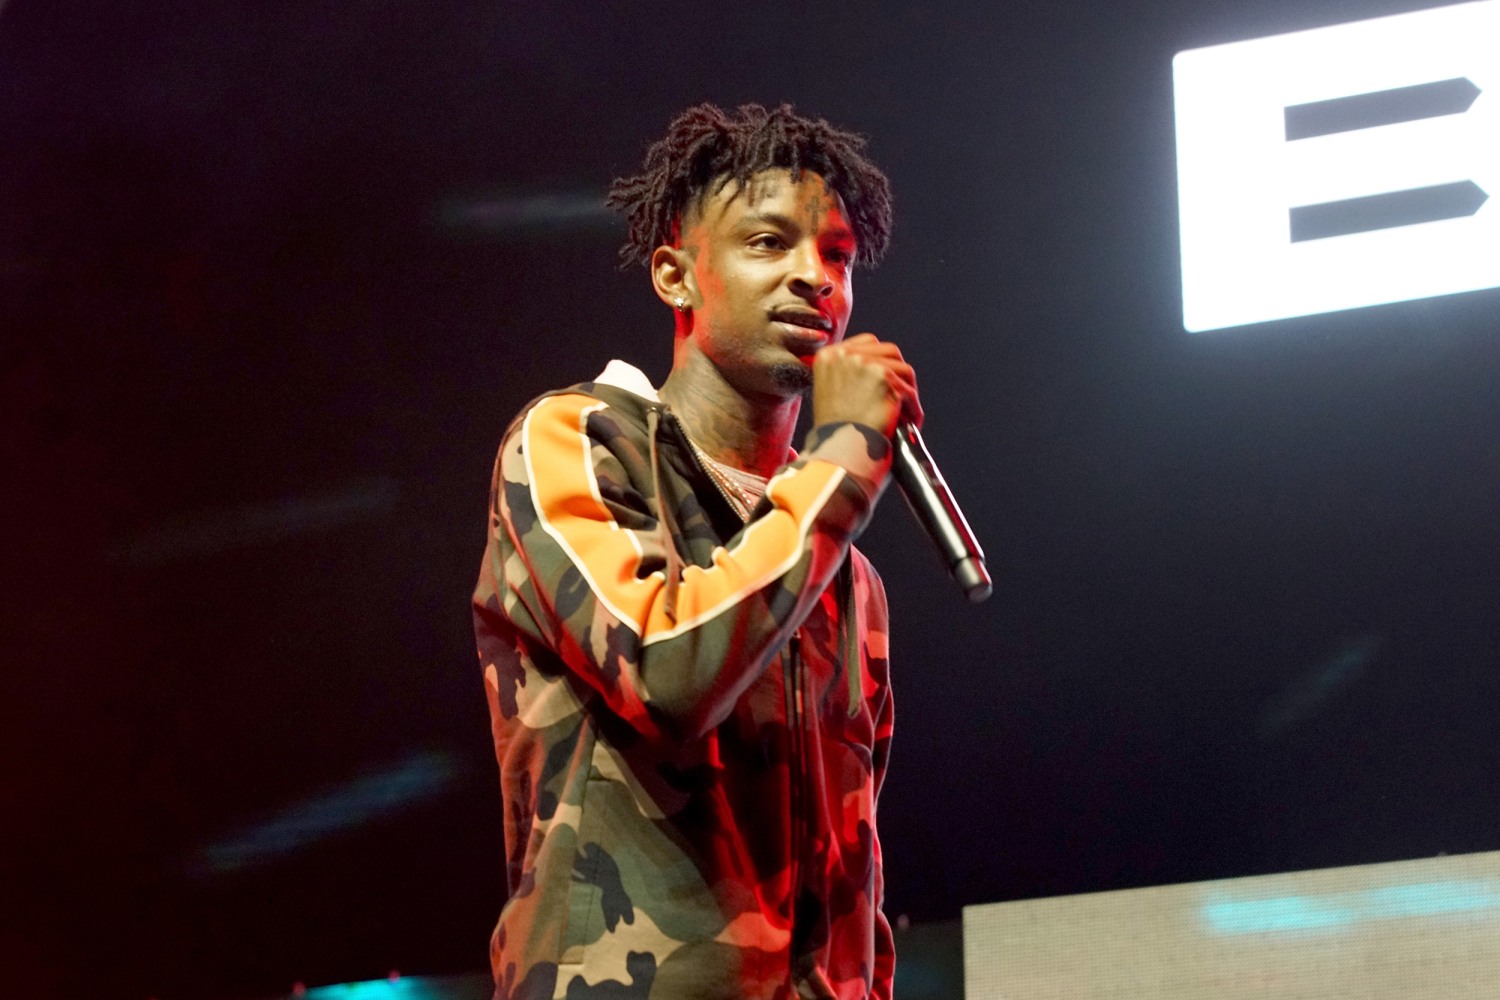 21 Savage was born in the UK, representatives confirm